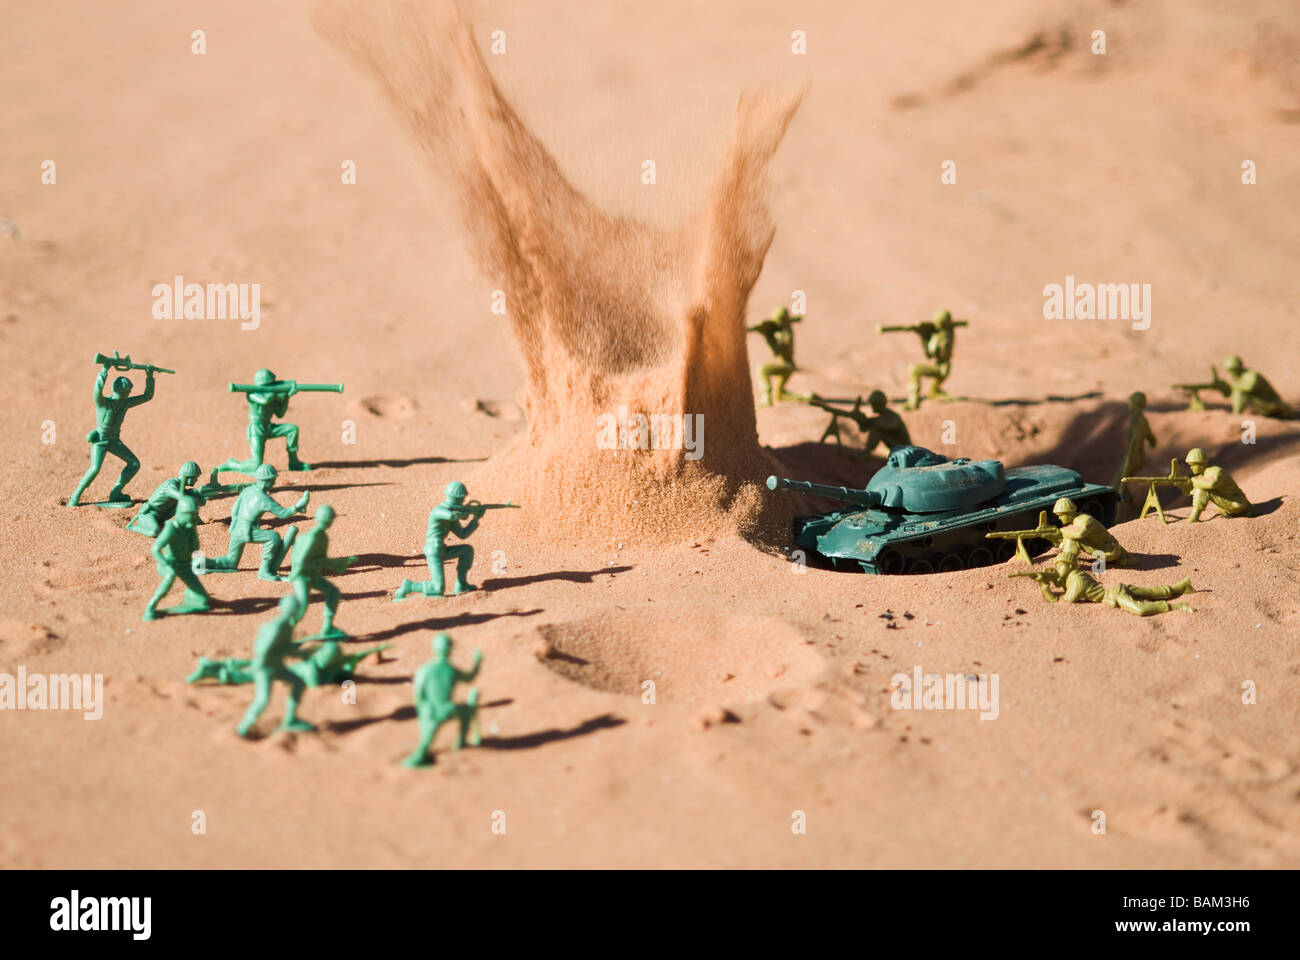 Toy soldiers fighting Stock Photo